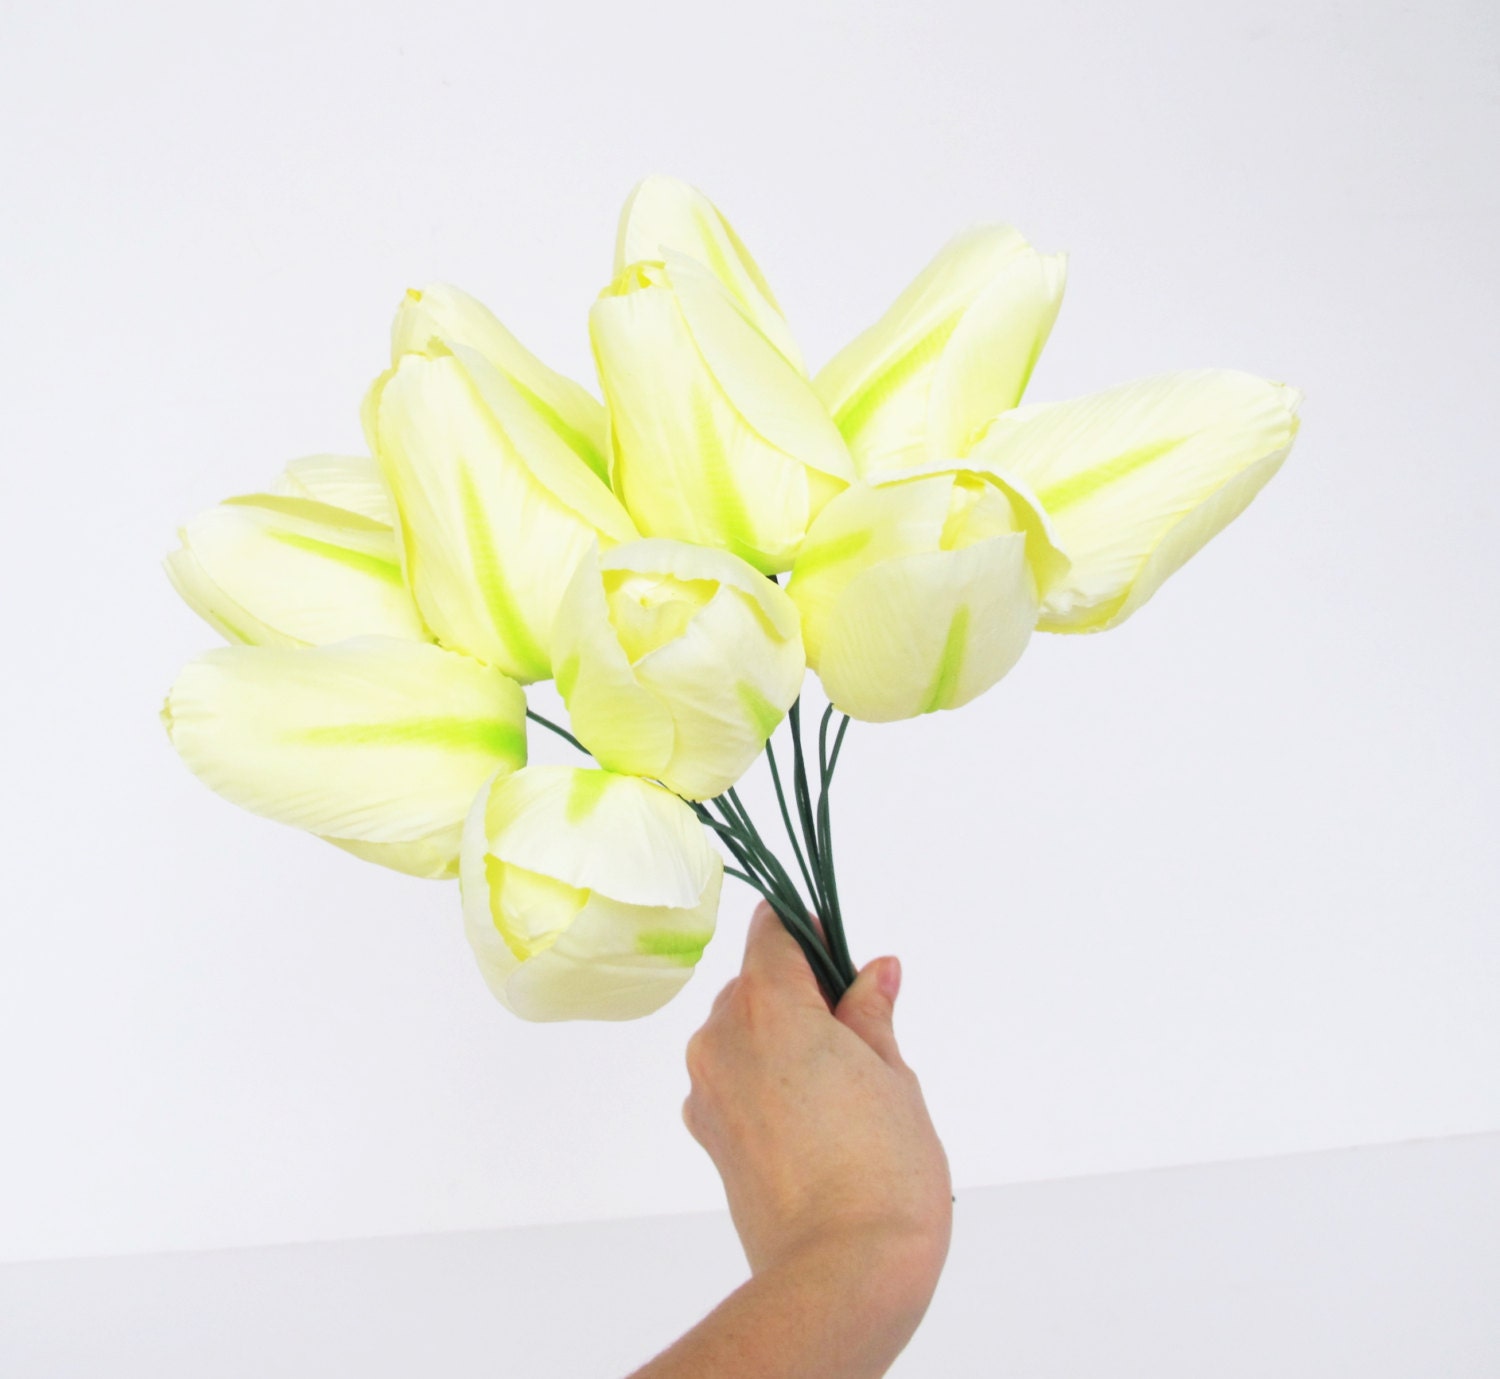 Faux Tulips Tulip Bundle Yellow Pack Of Artificial White Tulips InVase \u2013 eyecam.me